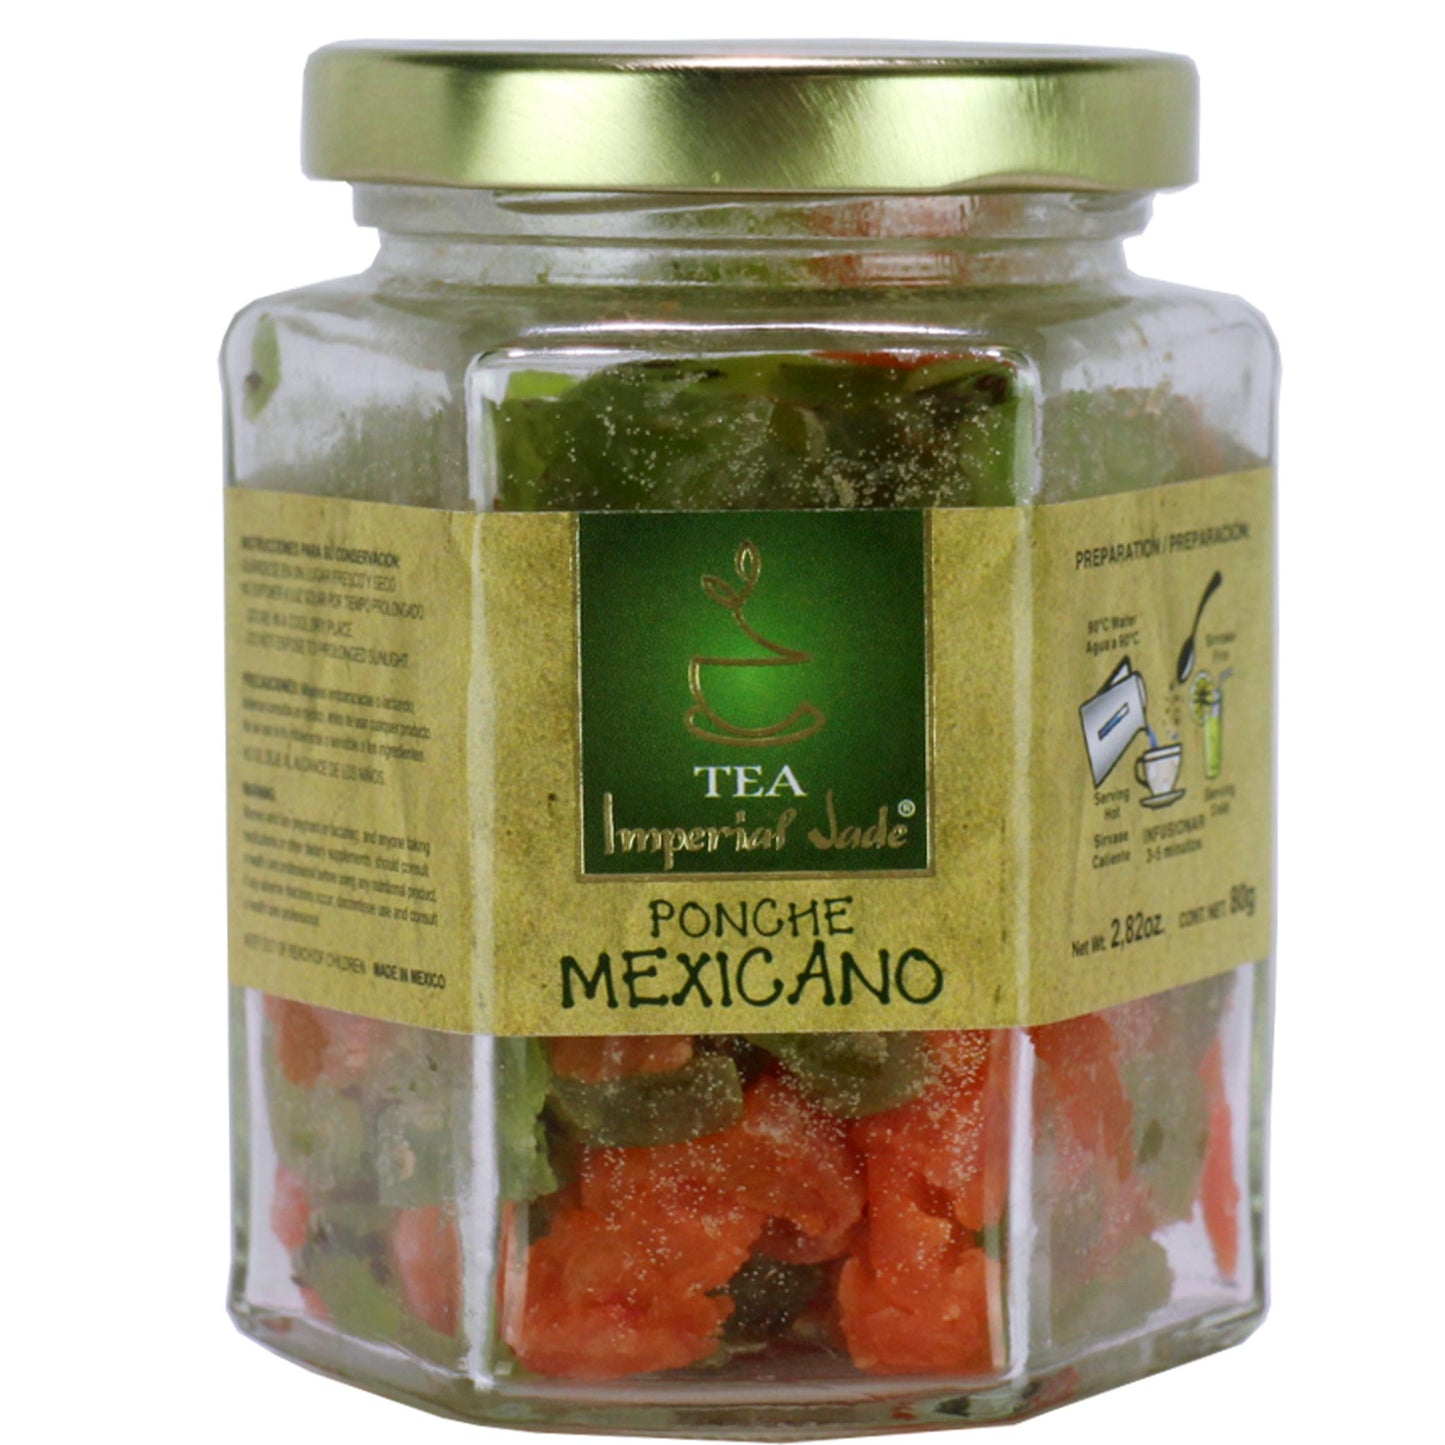 IMPERIAL JADE ® ponche mexicano 80g